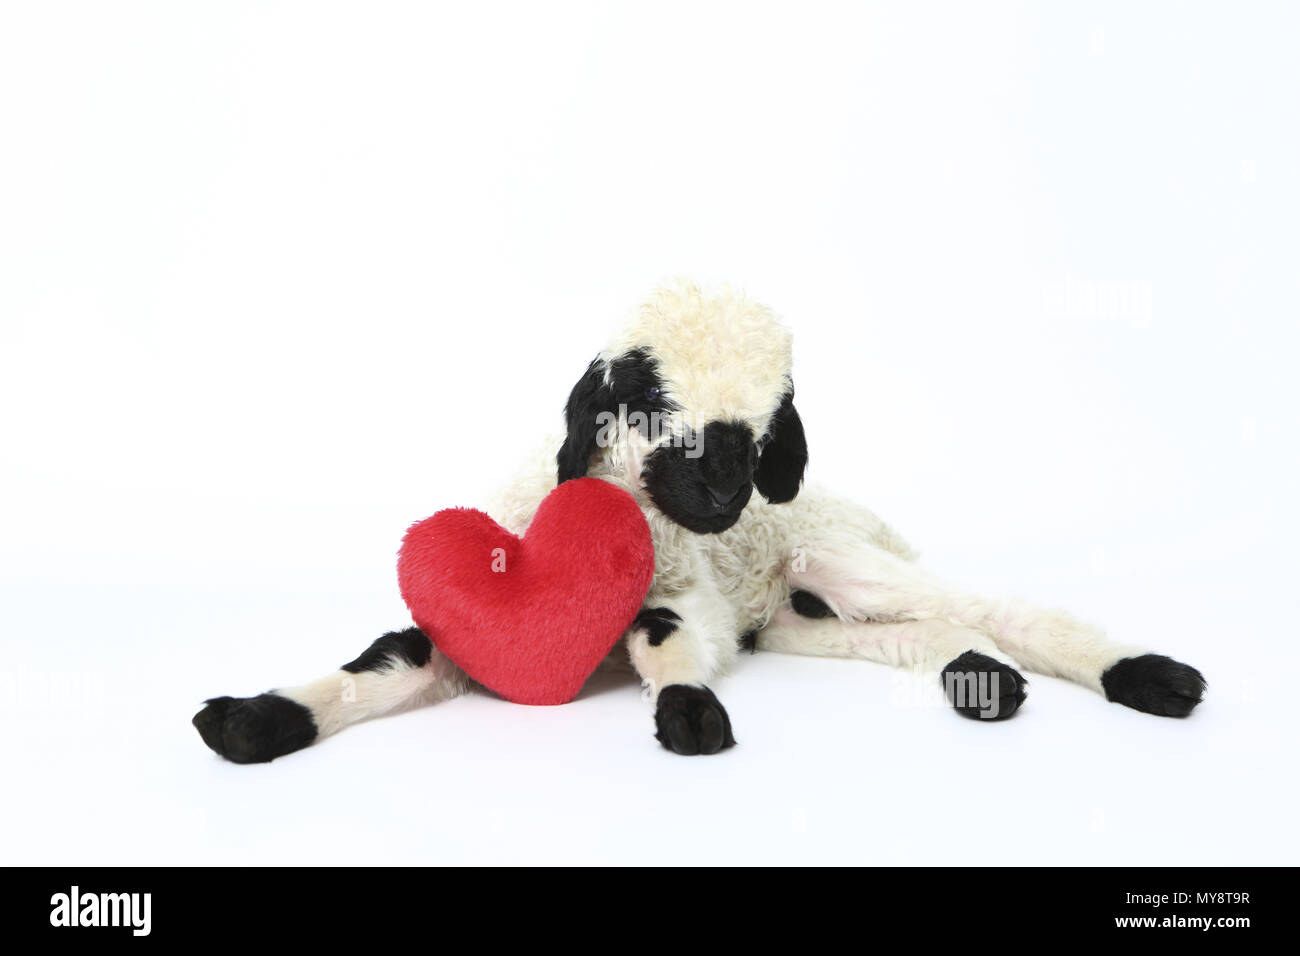 Valais Blacknose Sheep. Lamb (6 days old) lying next to a red plush heart. Studio picture against a pink background. Germany Stock Photo